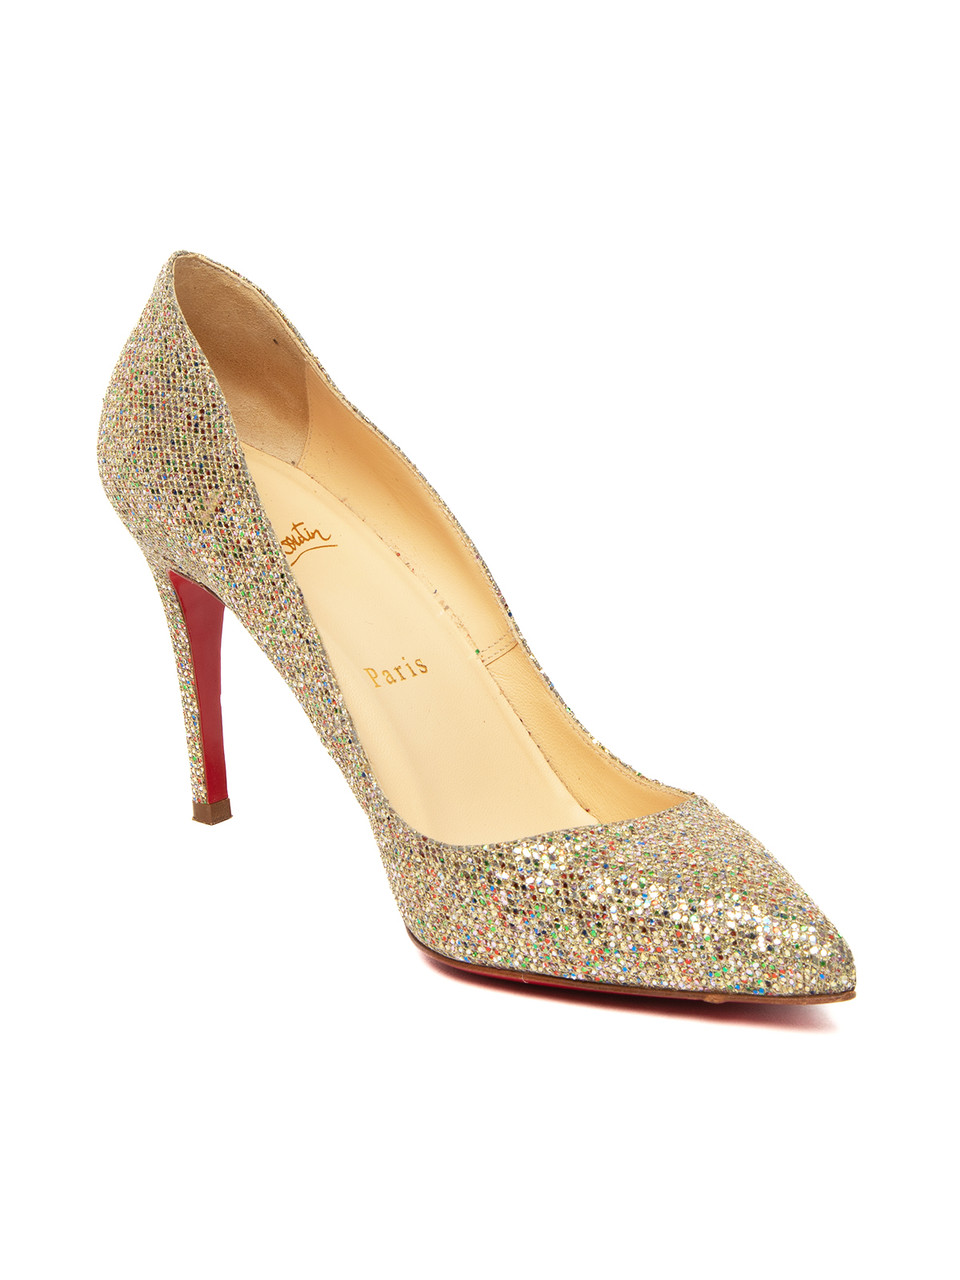 Christian Louboutin Champagne and Multicolour Low Heels